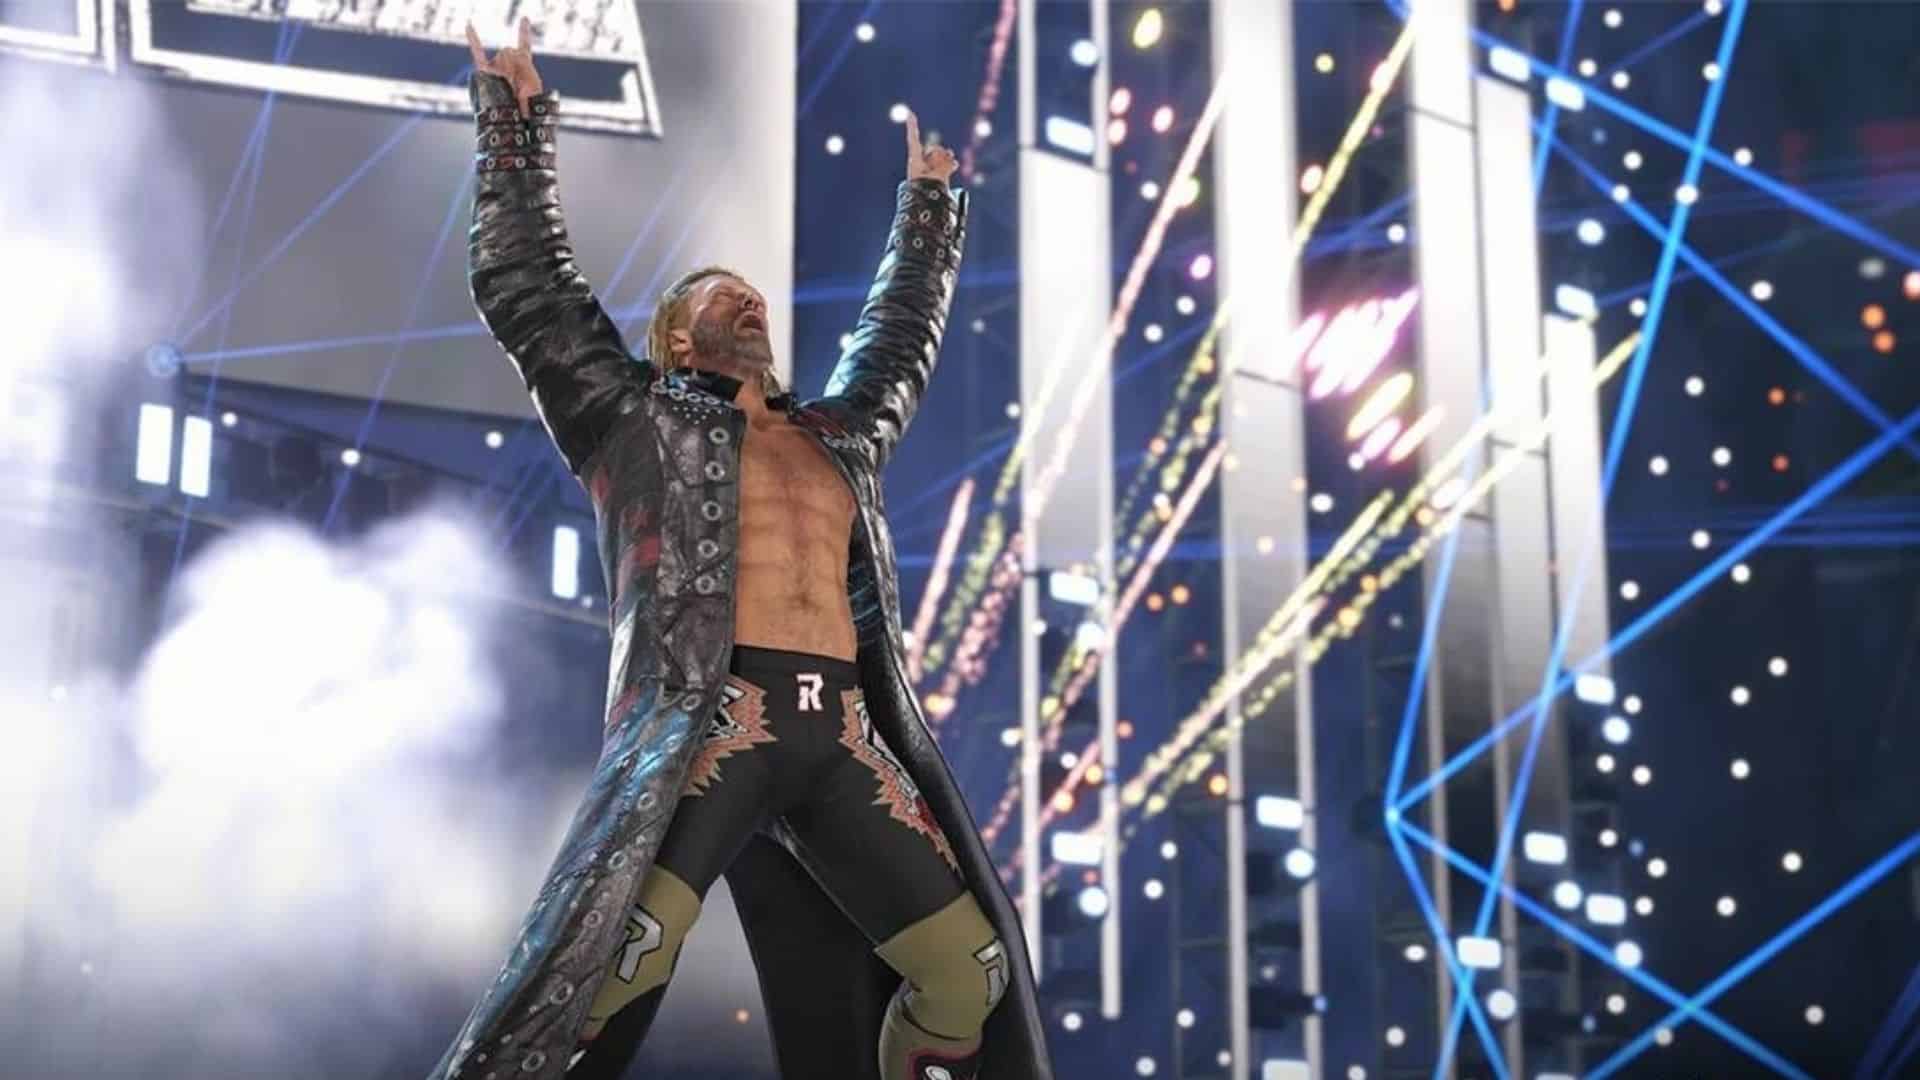 edge doing his entrance pose in wwe 2k22